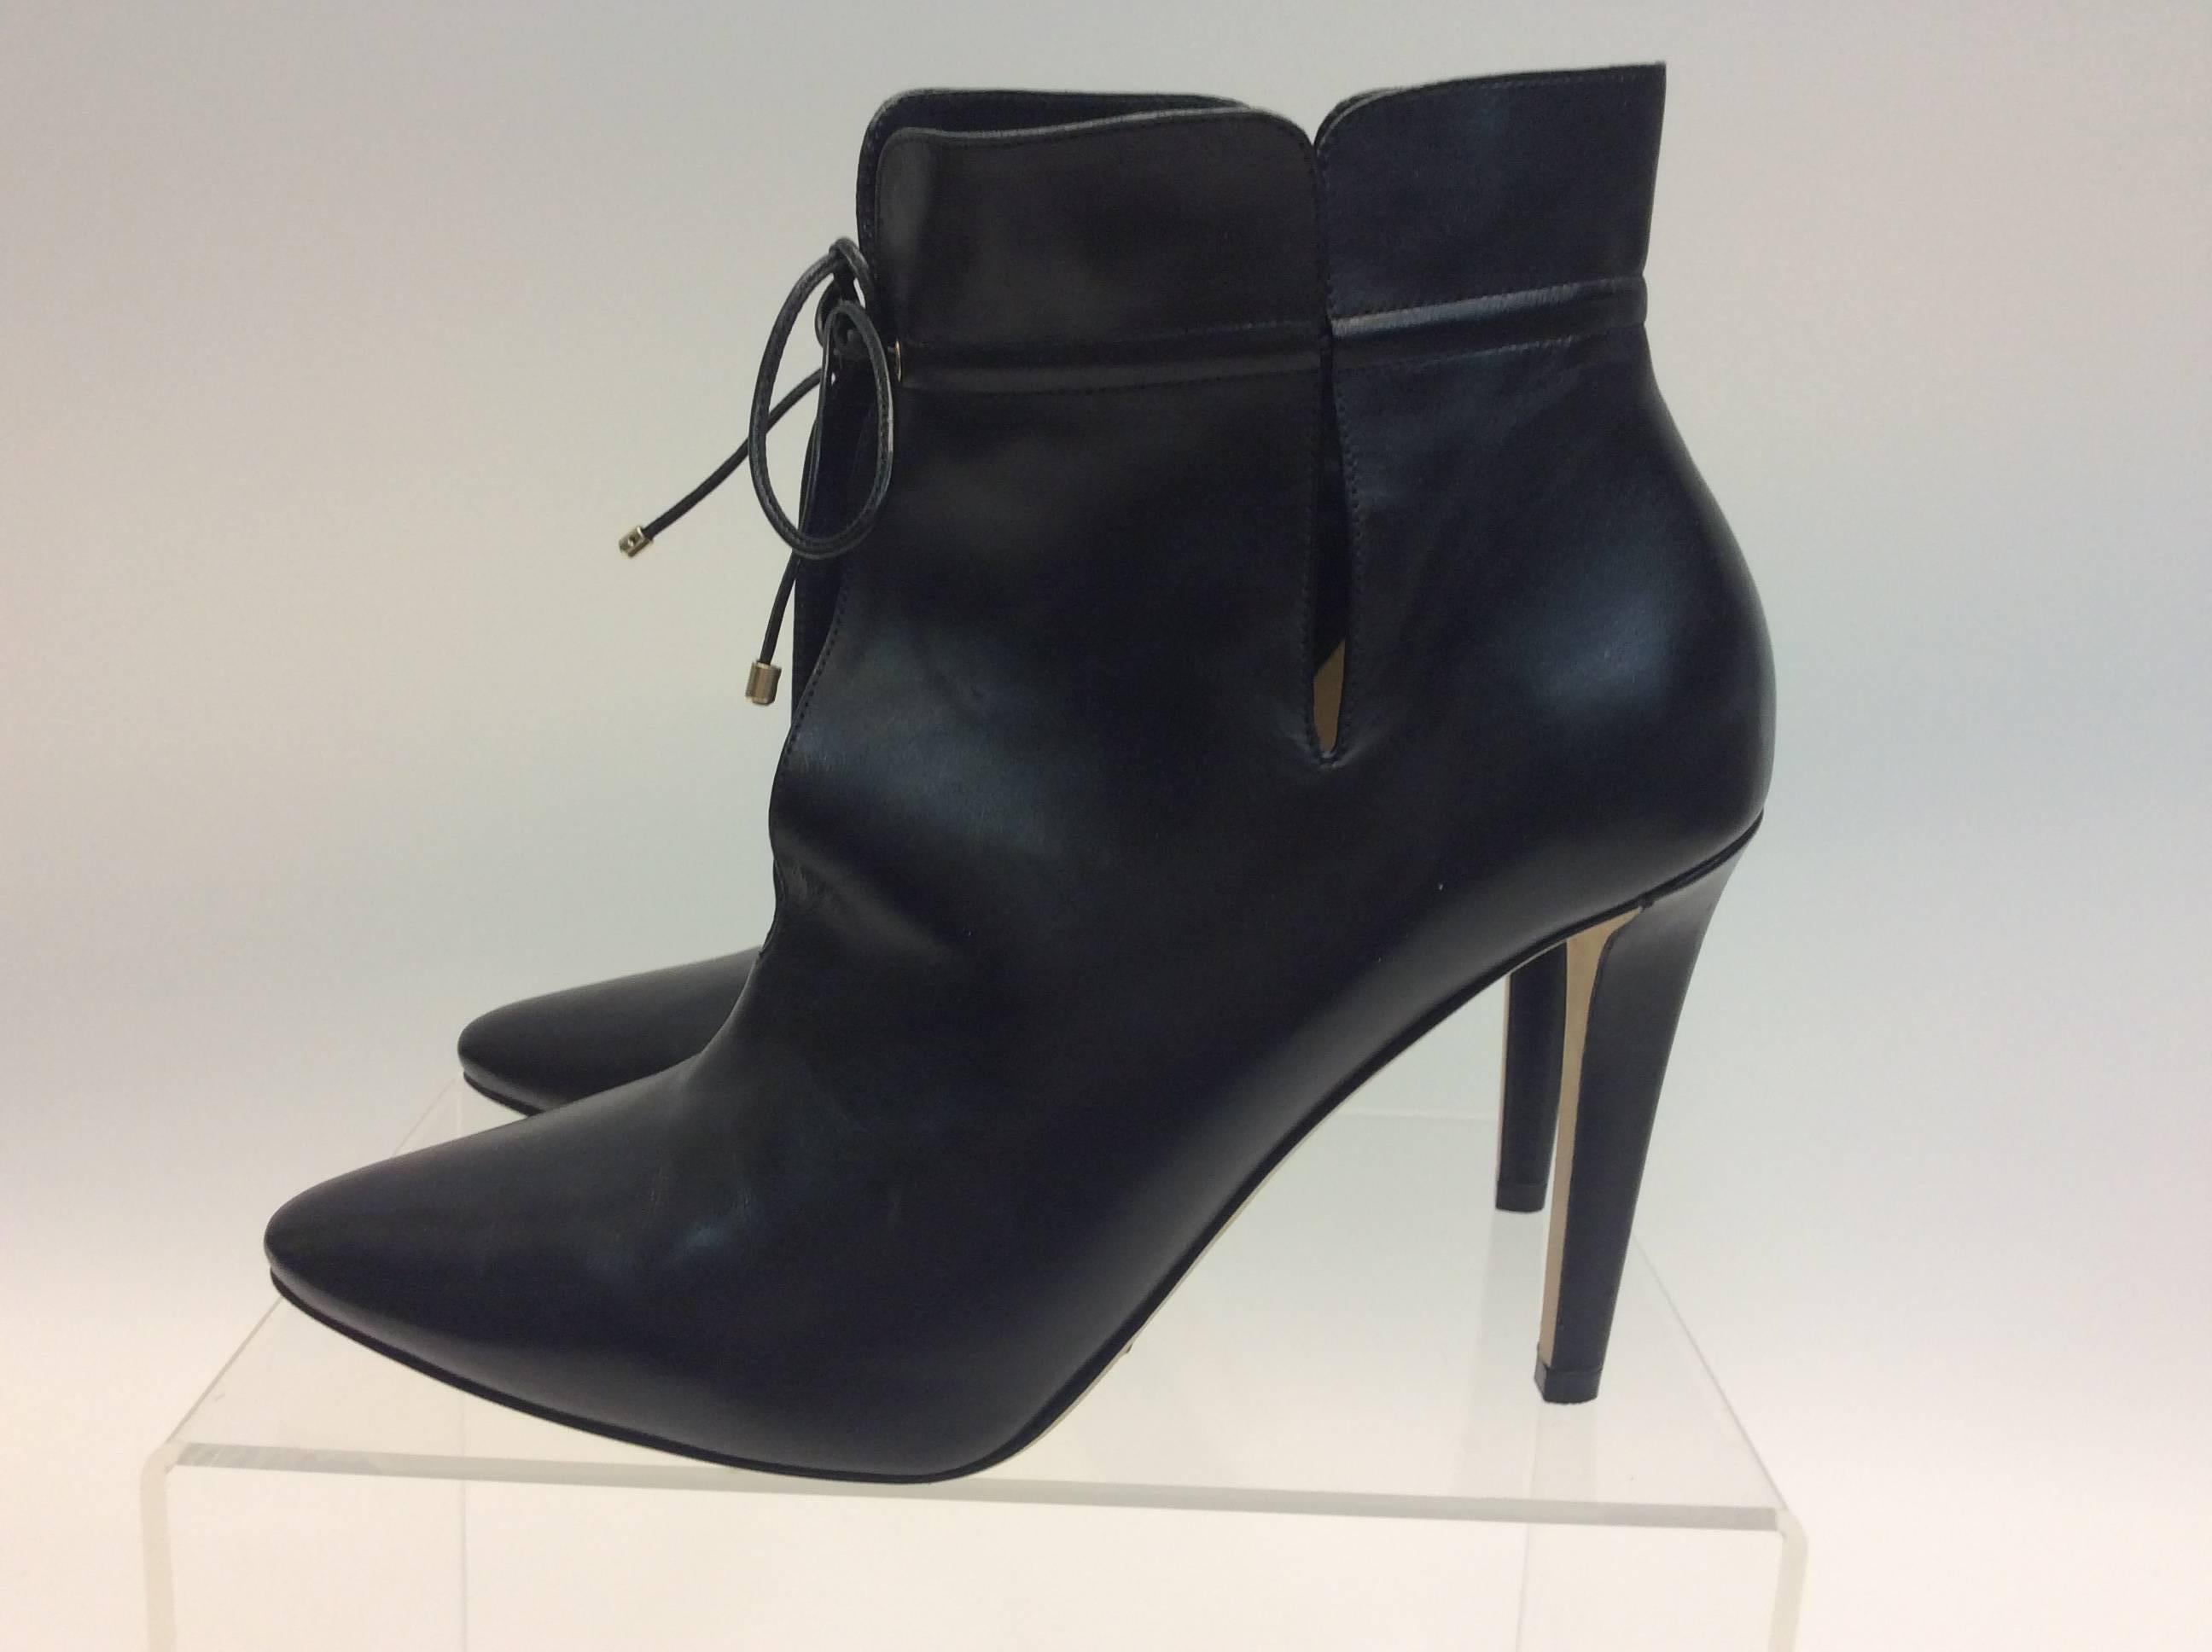 Jimmy Choo Black Leather Bootie
$550
Made in Italy
Leather
Size 39.5
4